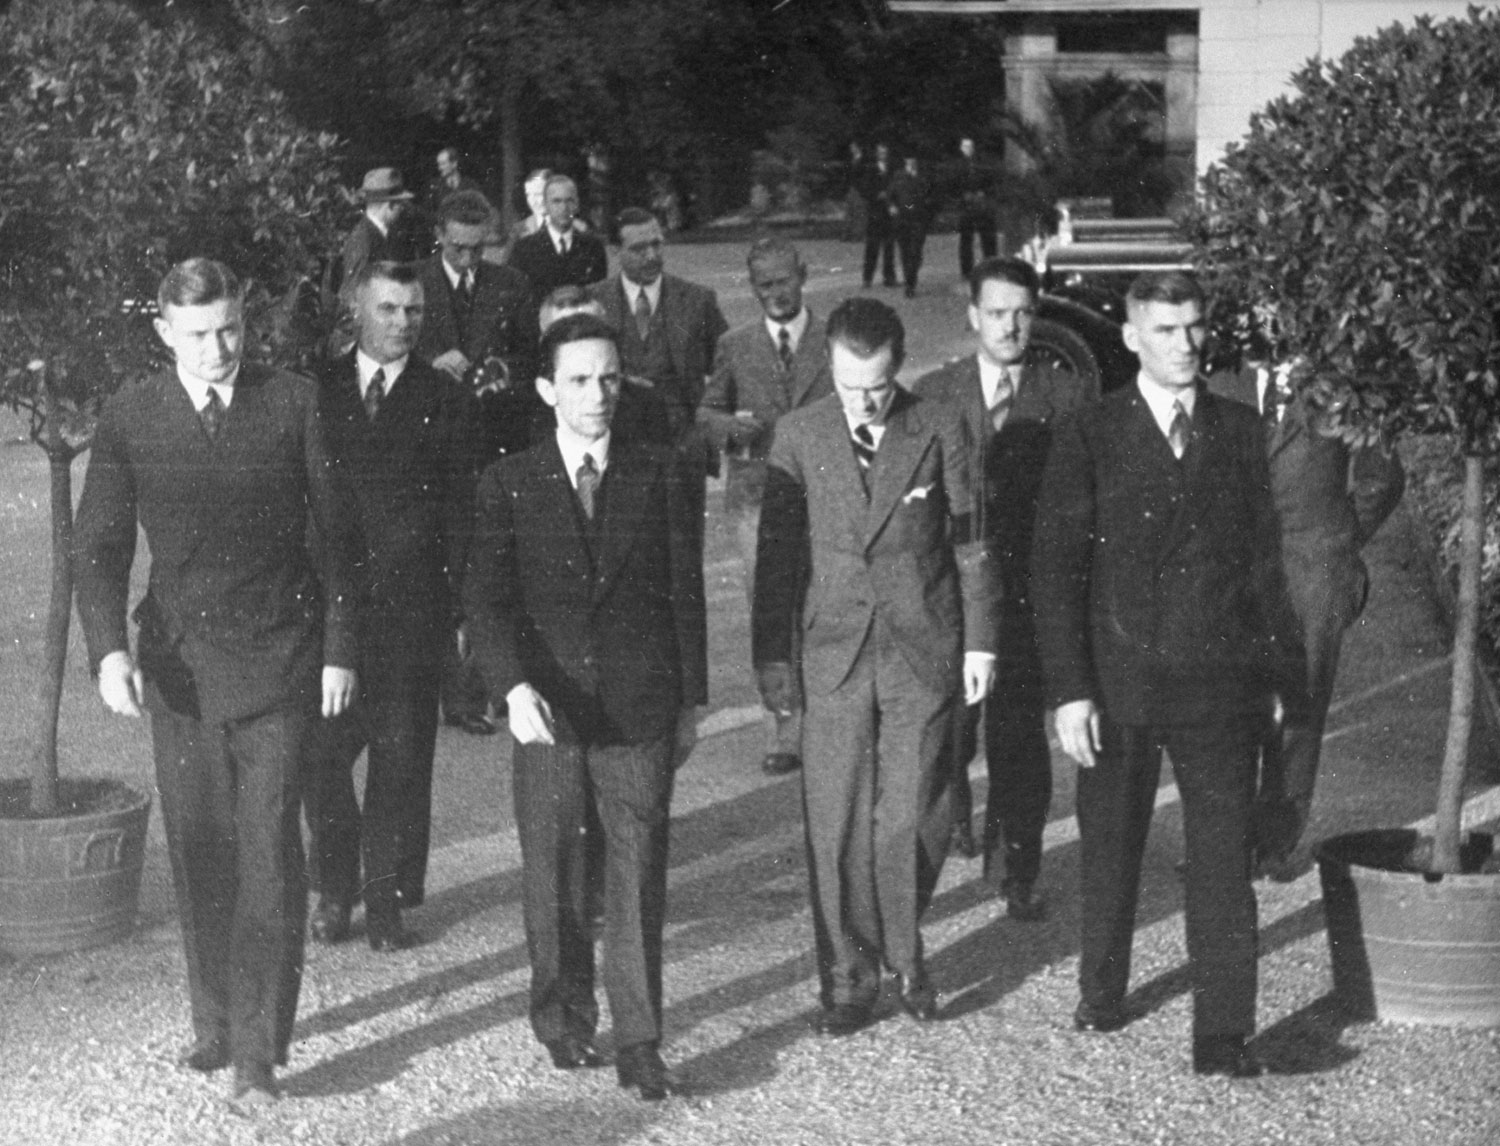 Joseph Goebbels (center) walks with the German delegation at League of Nations conference, Geneva, 1933.